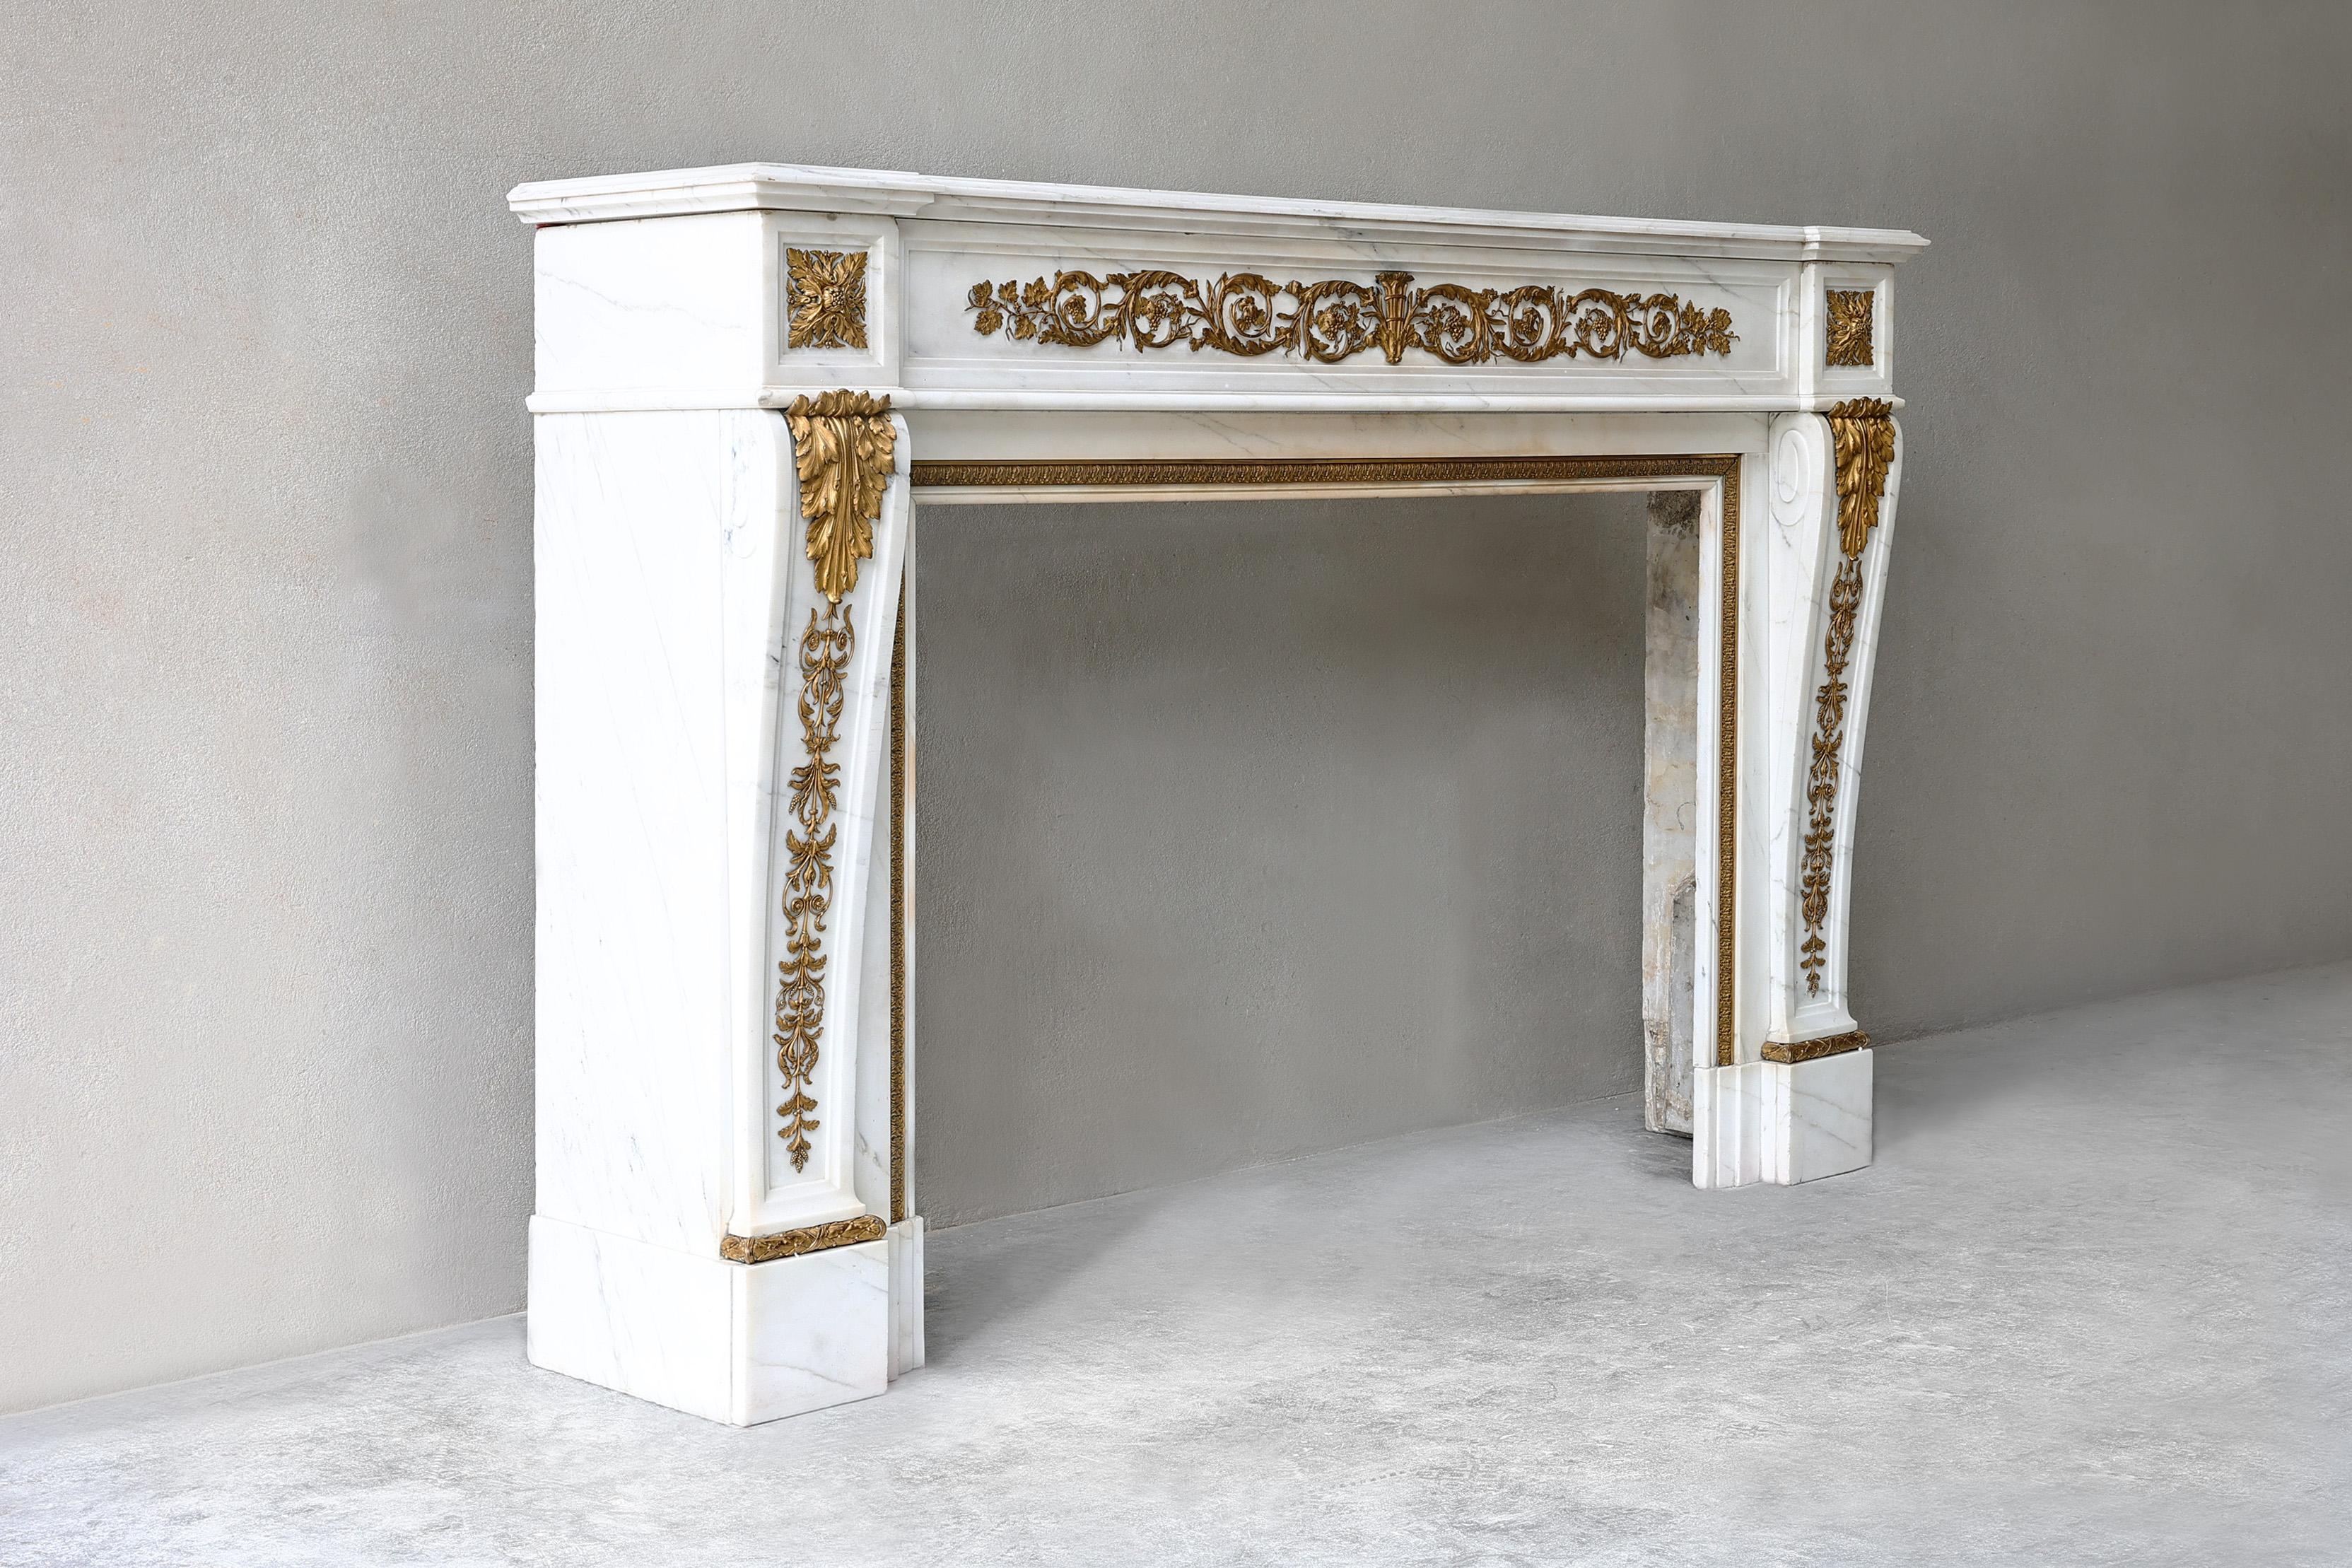 Very chic antique fireplace of Carrara marble with gilded gold. An elegant fireplace with beautiful ornaments and decorations in gilded gold in the front part and continuing on the legs. This 19th century fireplace is in the style of Louis XVI and